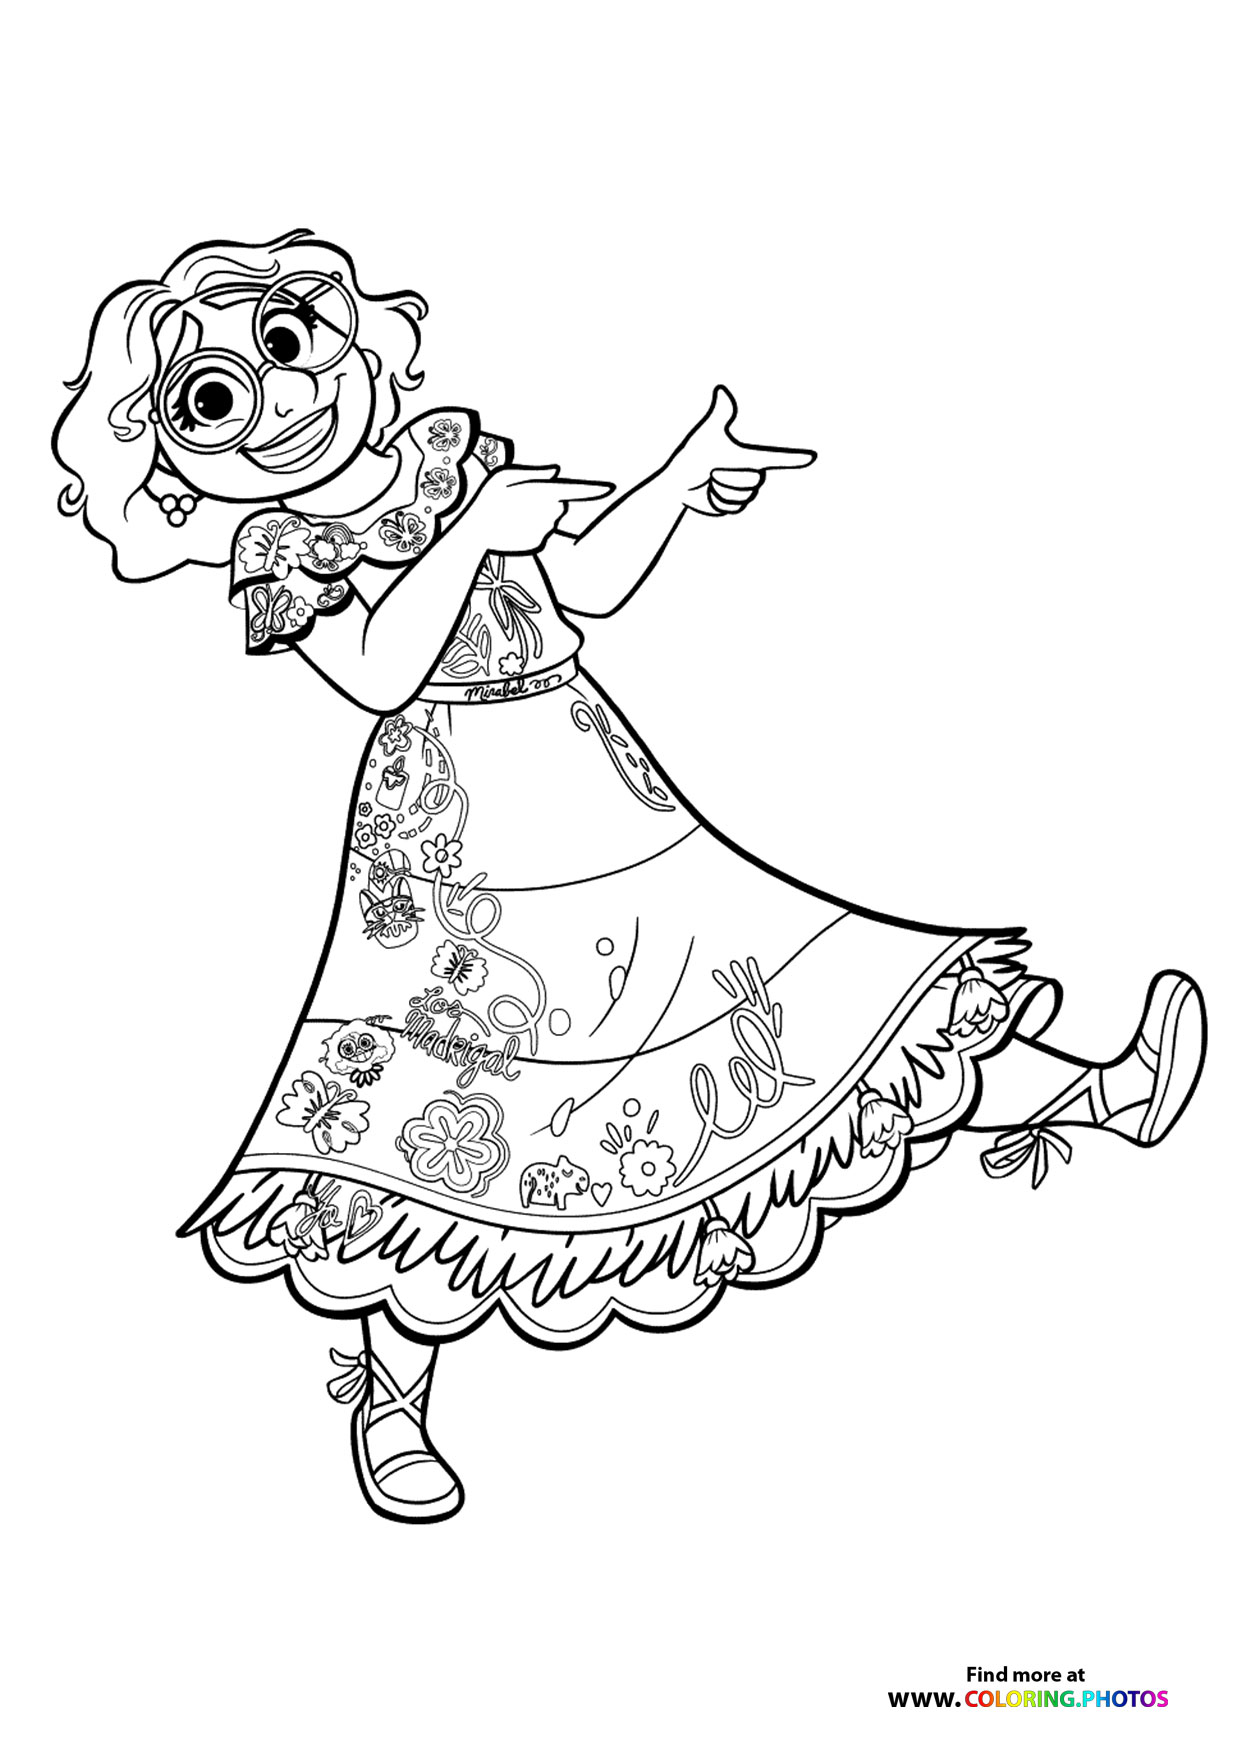 Luisa - Coloring Pages for kids